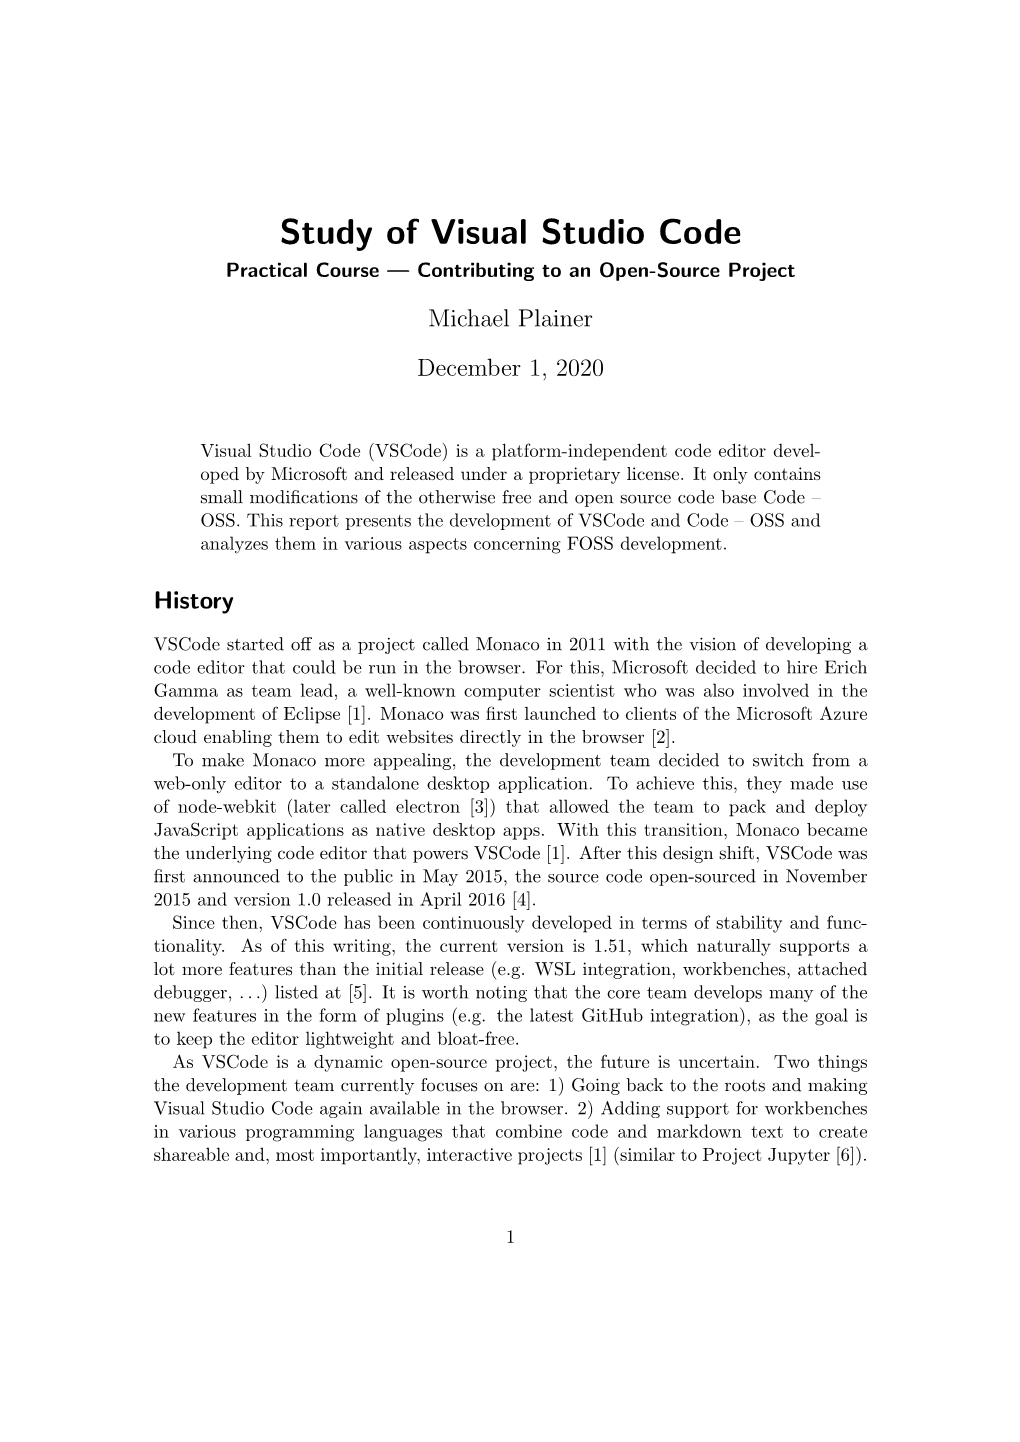 Study of Visual Studio Code Practical Course — Contributing to an Open-Source Project